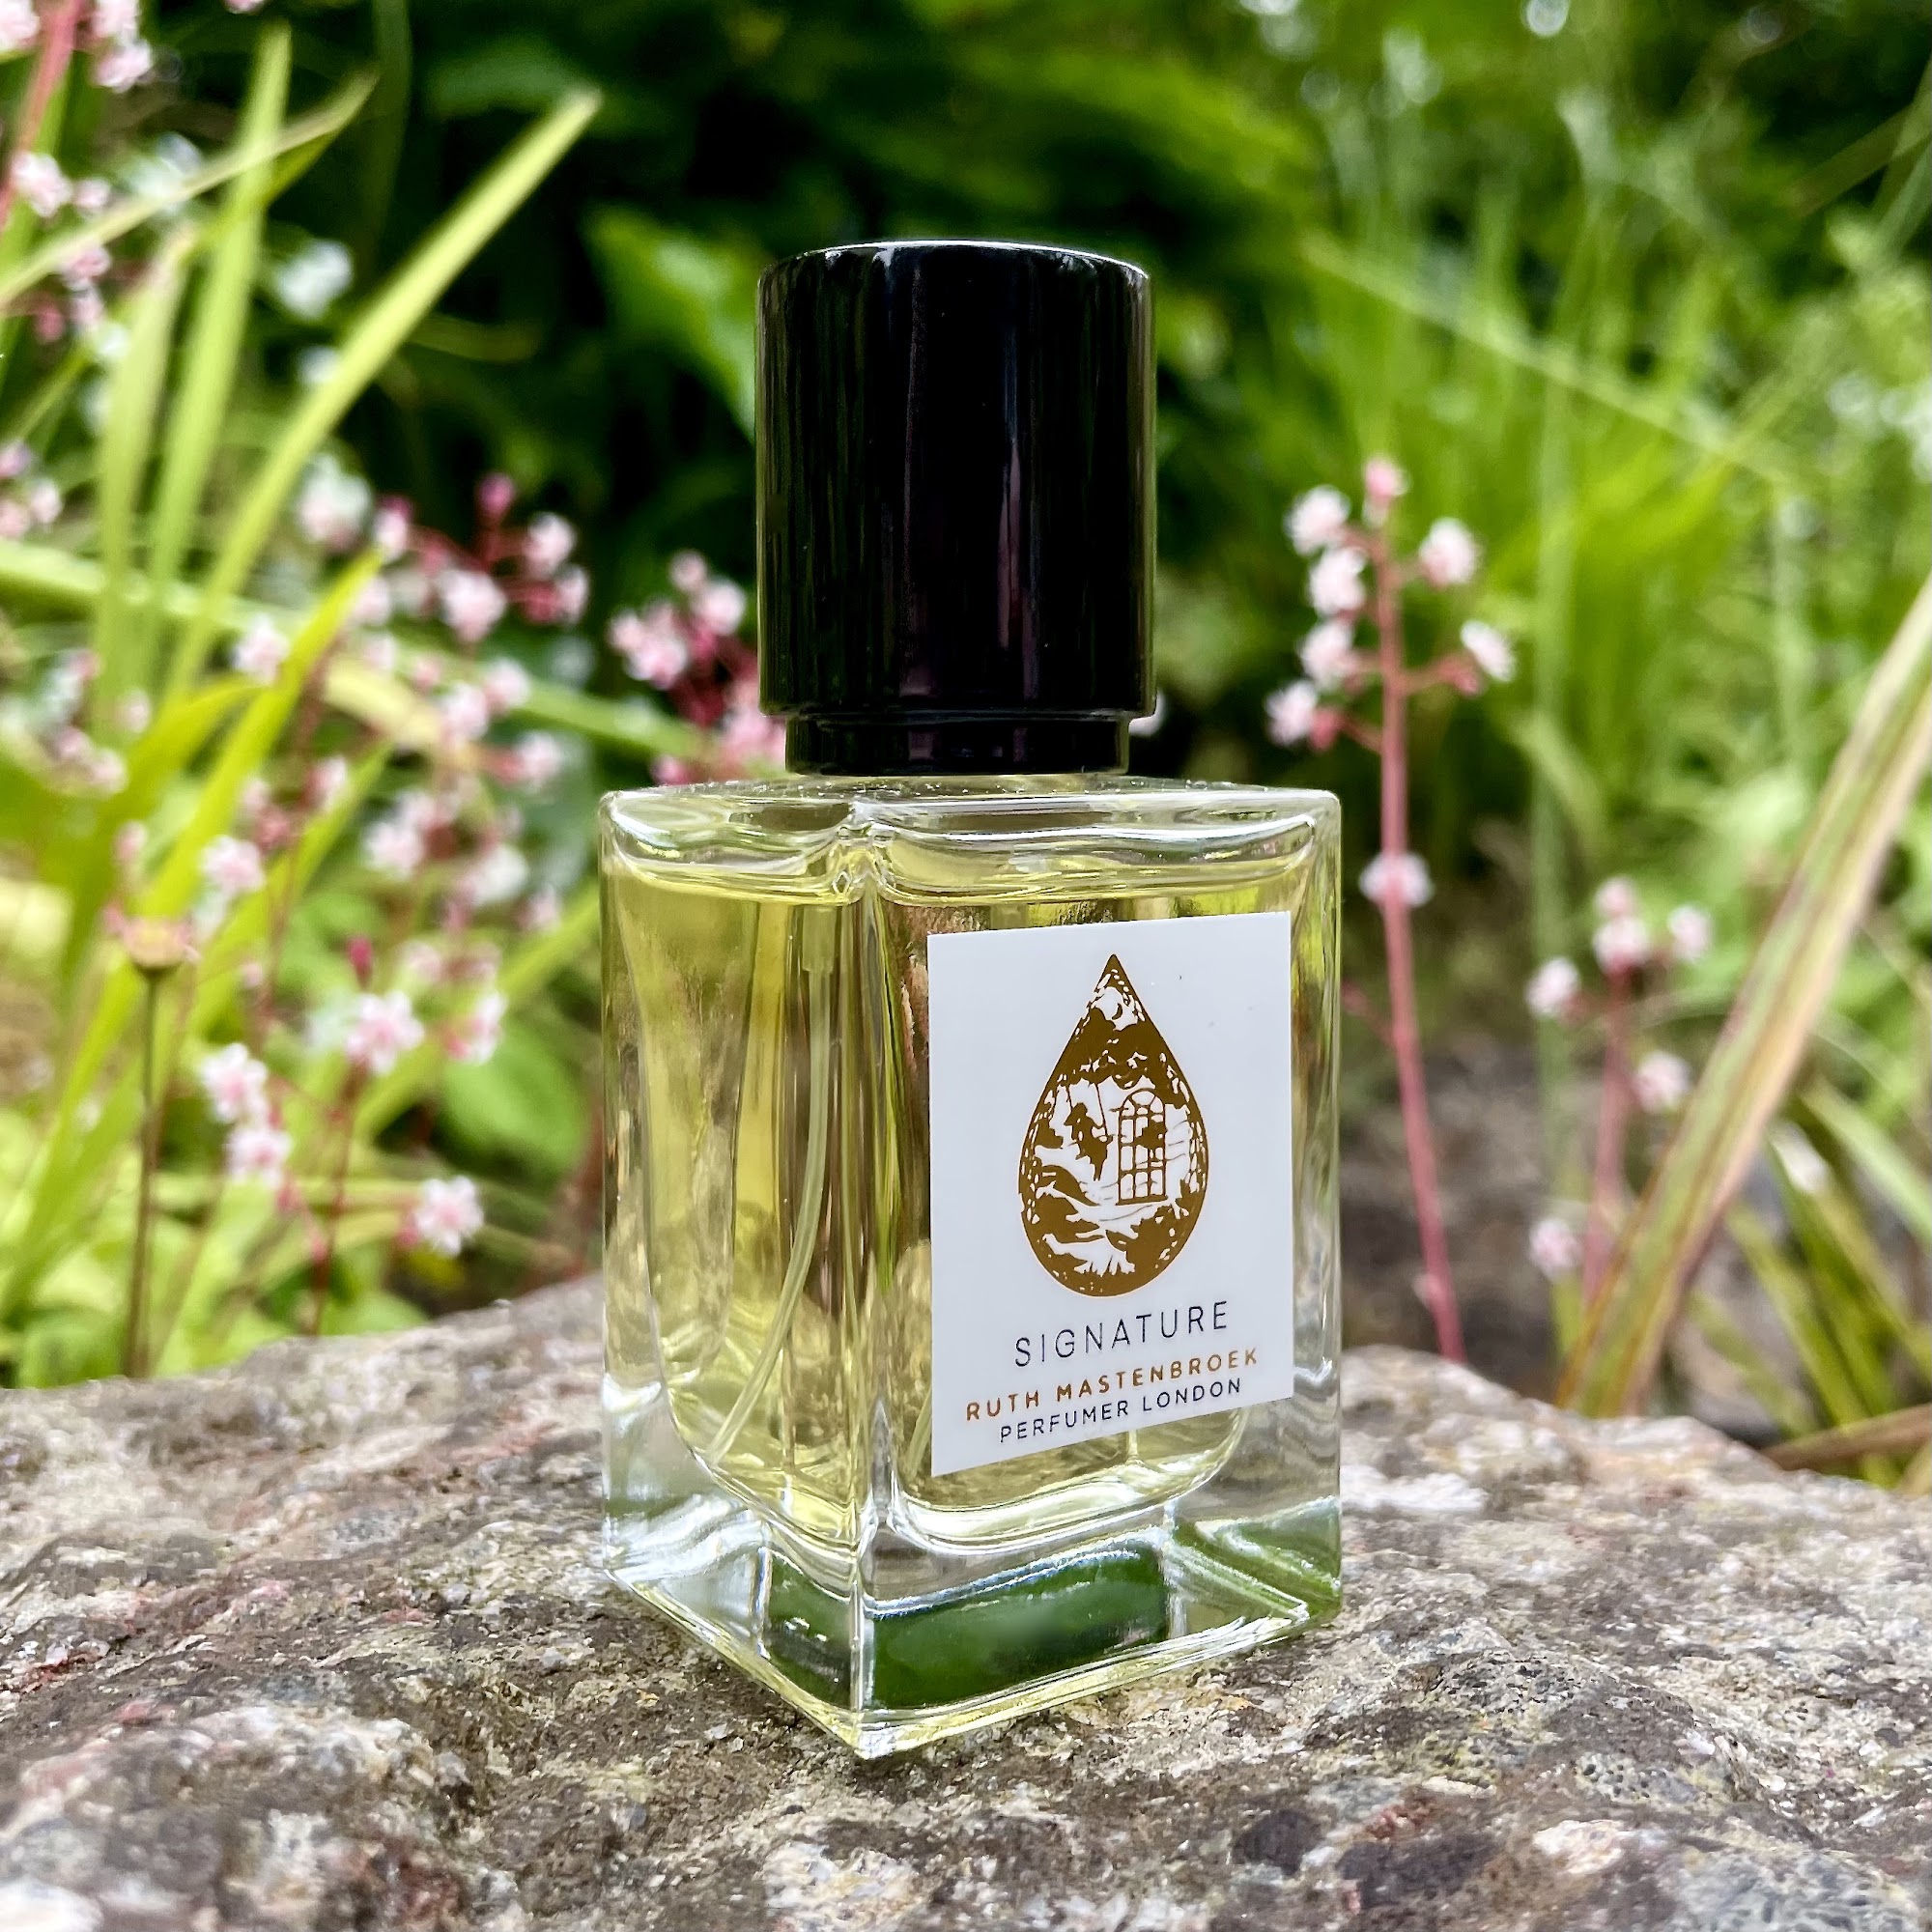 A bottle of the perfume Signature by Ruth Mastenbroek